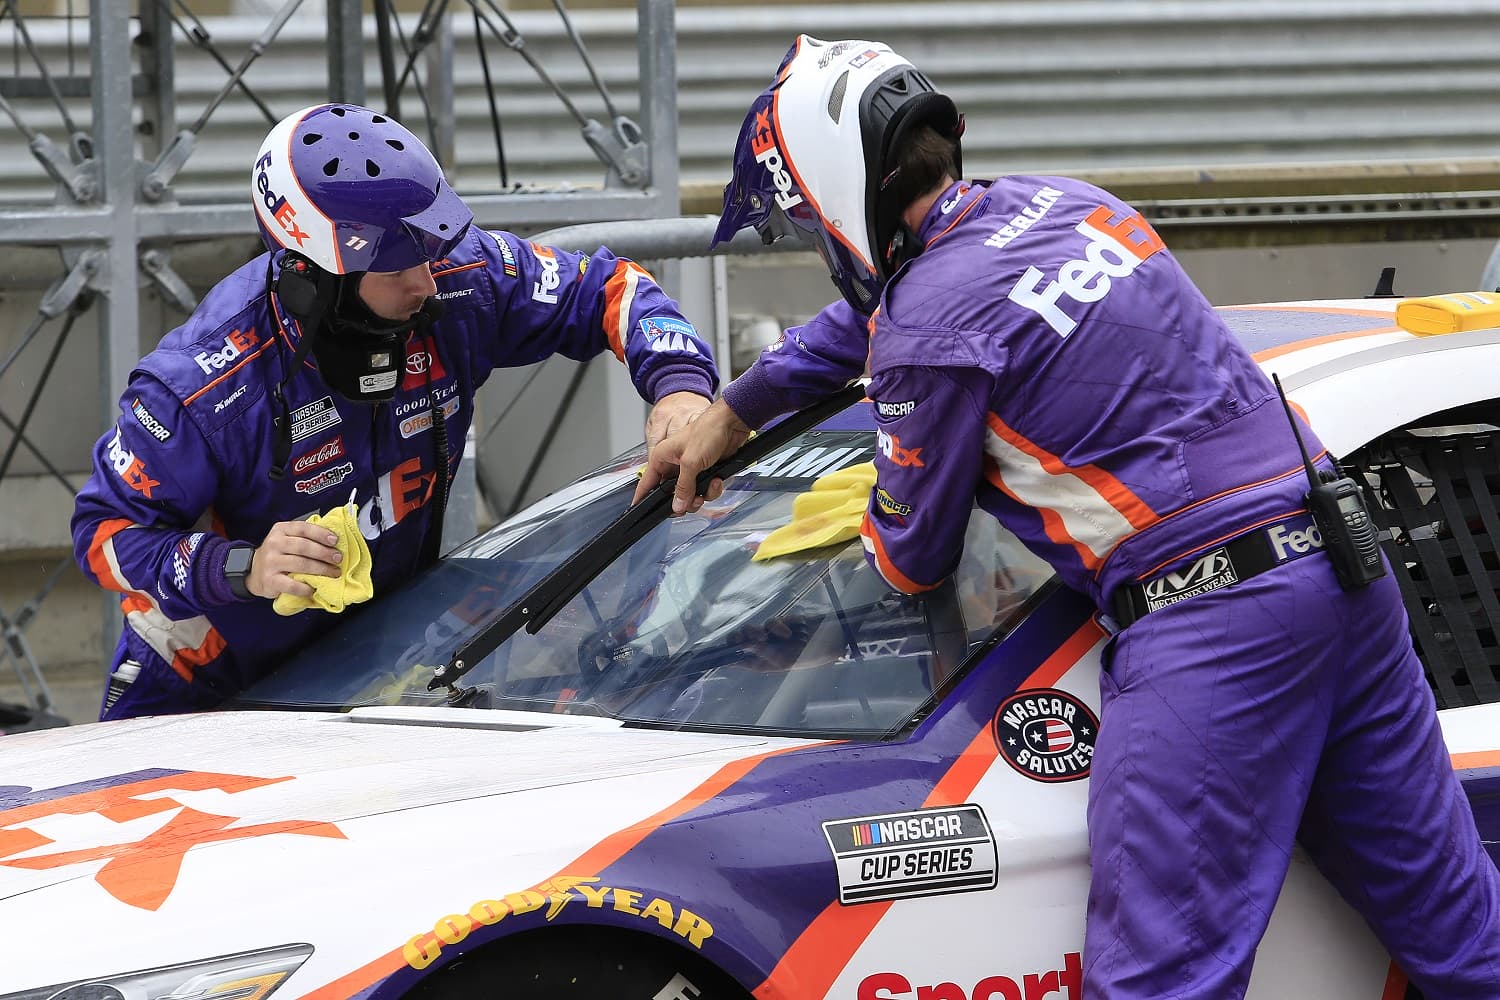 Crew members for Denny Hamlin's Toyota wipe the windshield down with RainX during the inaugural EchoPark Automotive Texas Grand Prix NASCAR Cup Series race on May 23, 2021, at Circuit of America in Austin, Texas.  | David J. Griffin/Icon Sportswire via Getty Images